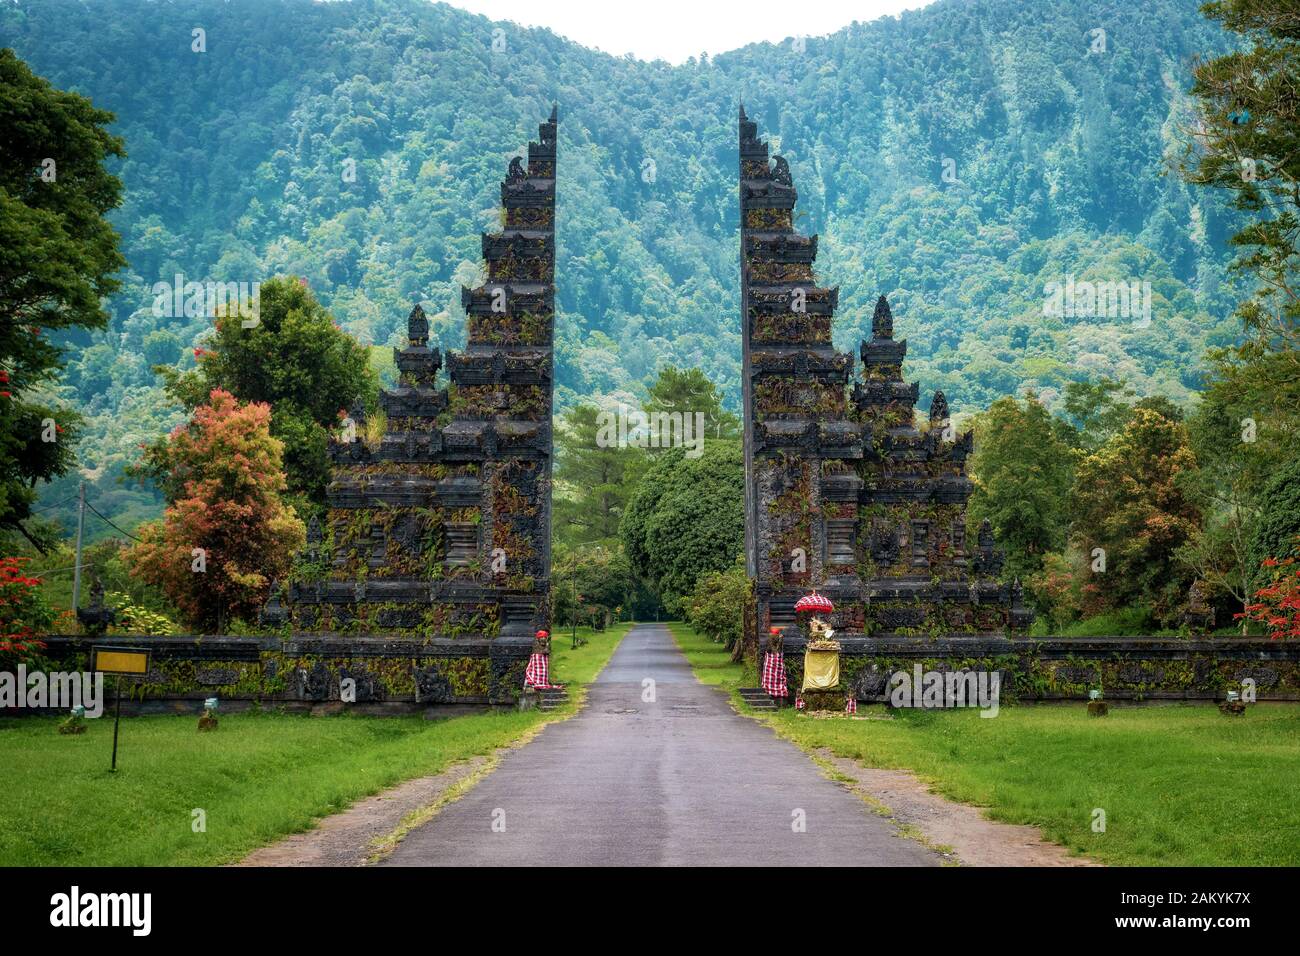 Bali, Indonesia, traditional Balinese architecture, view of landmark temple gates in Northern Bali. Stock Photo